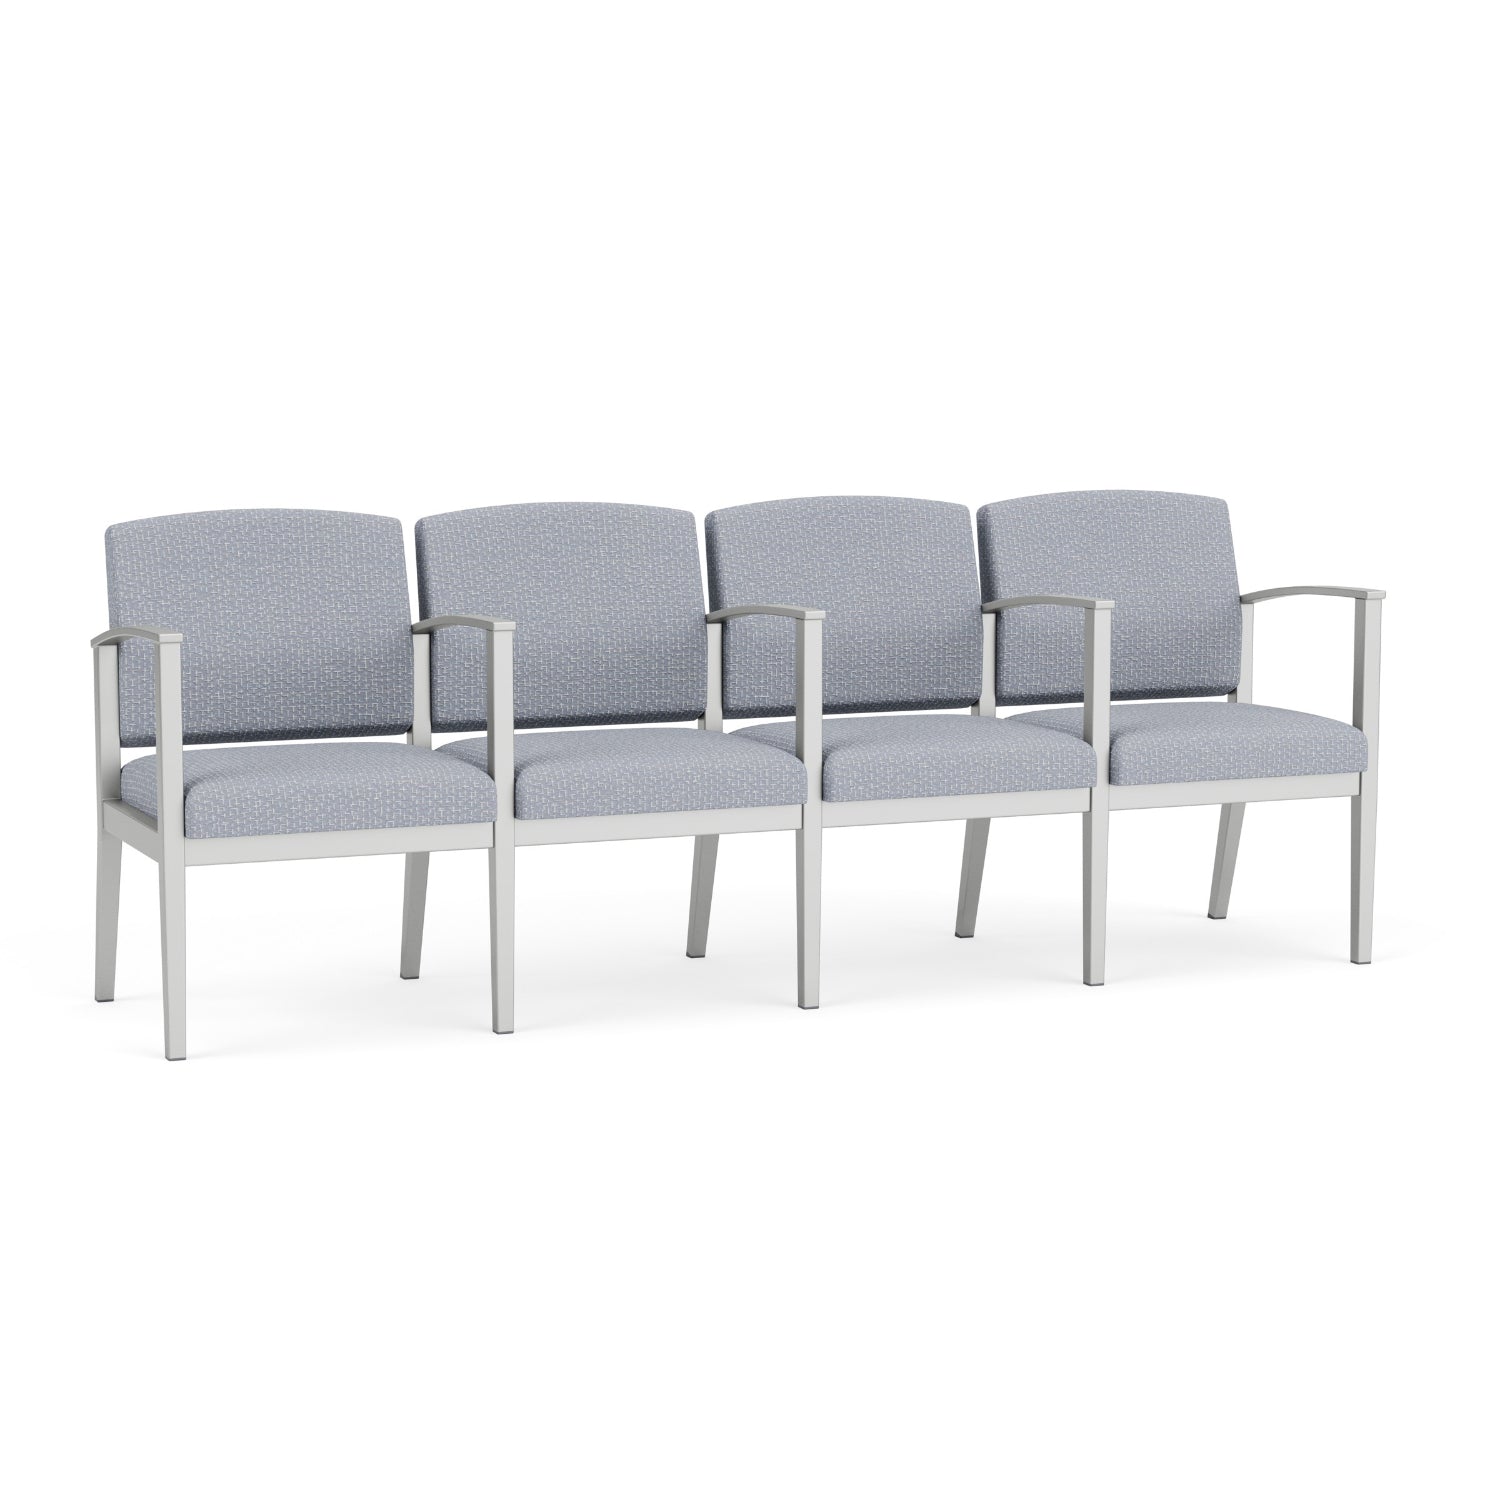 Amherst Steel Collection Reception Seating, 4 Seats with Center Arms, Designer Fabric Upholstery, FREE SHIPPING